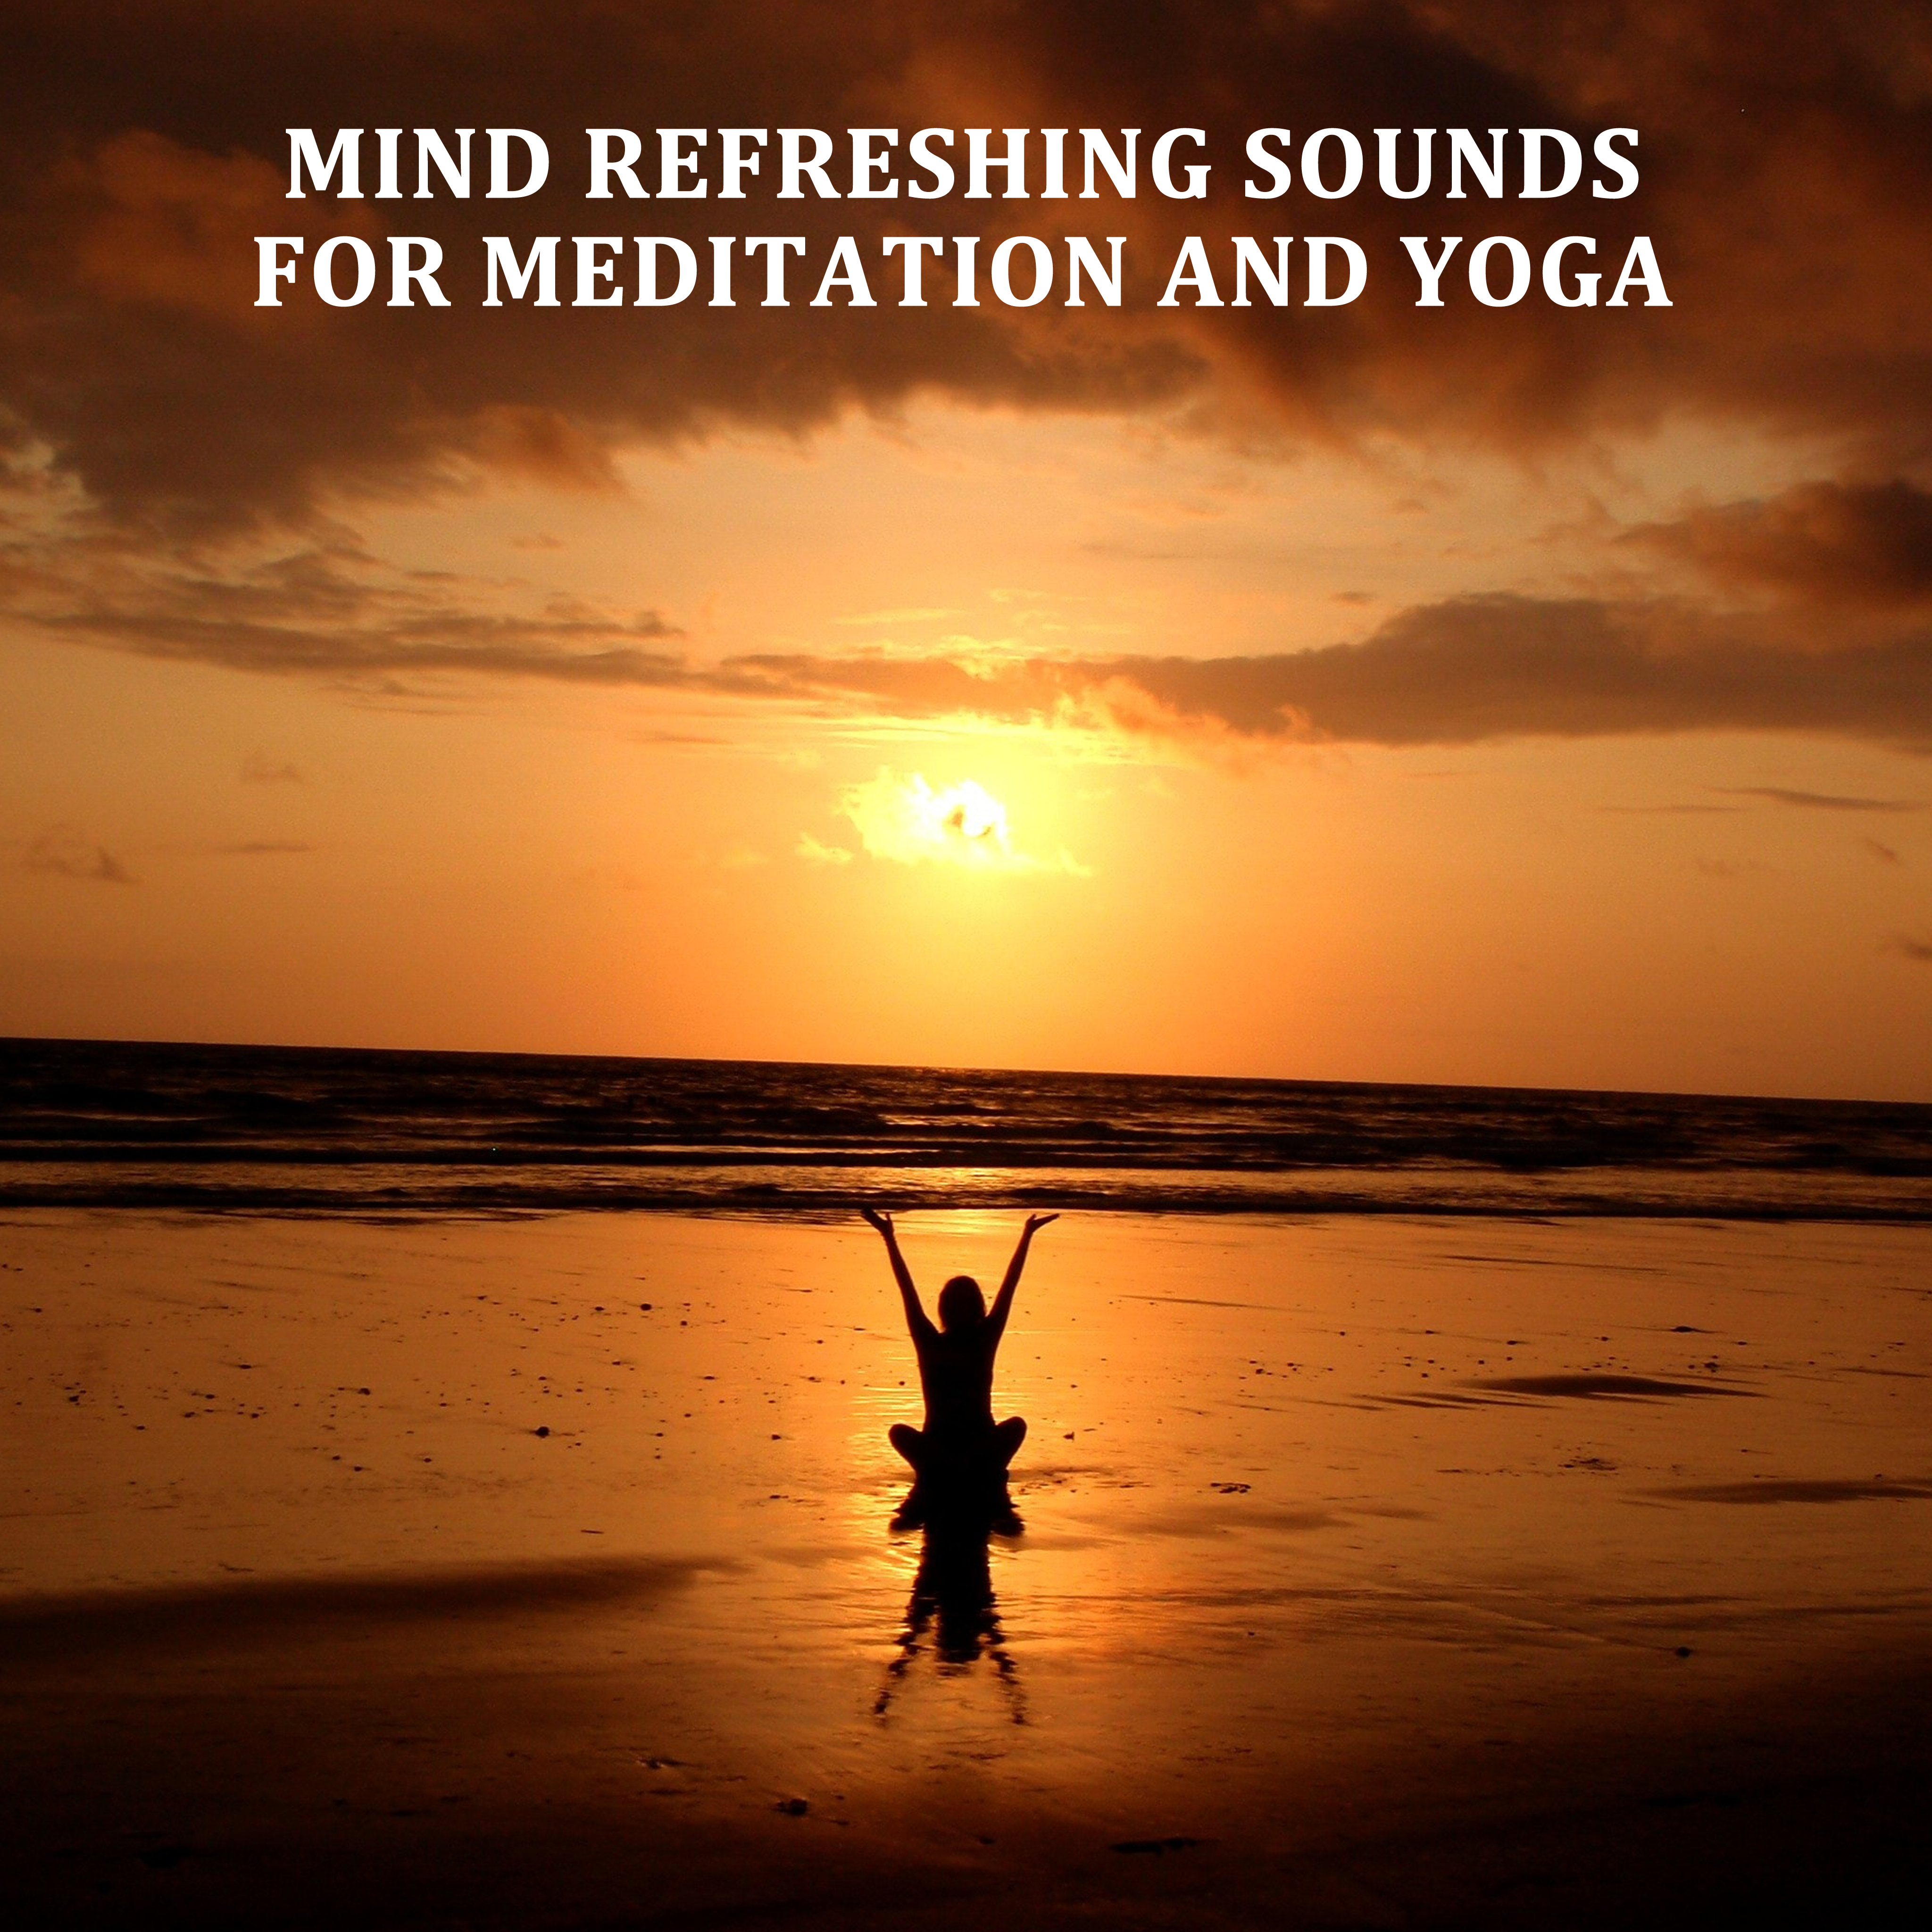 14 Mind Refreshing Sounds for Meditation and Yoga